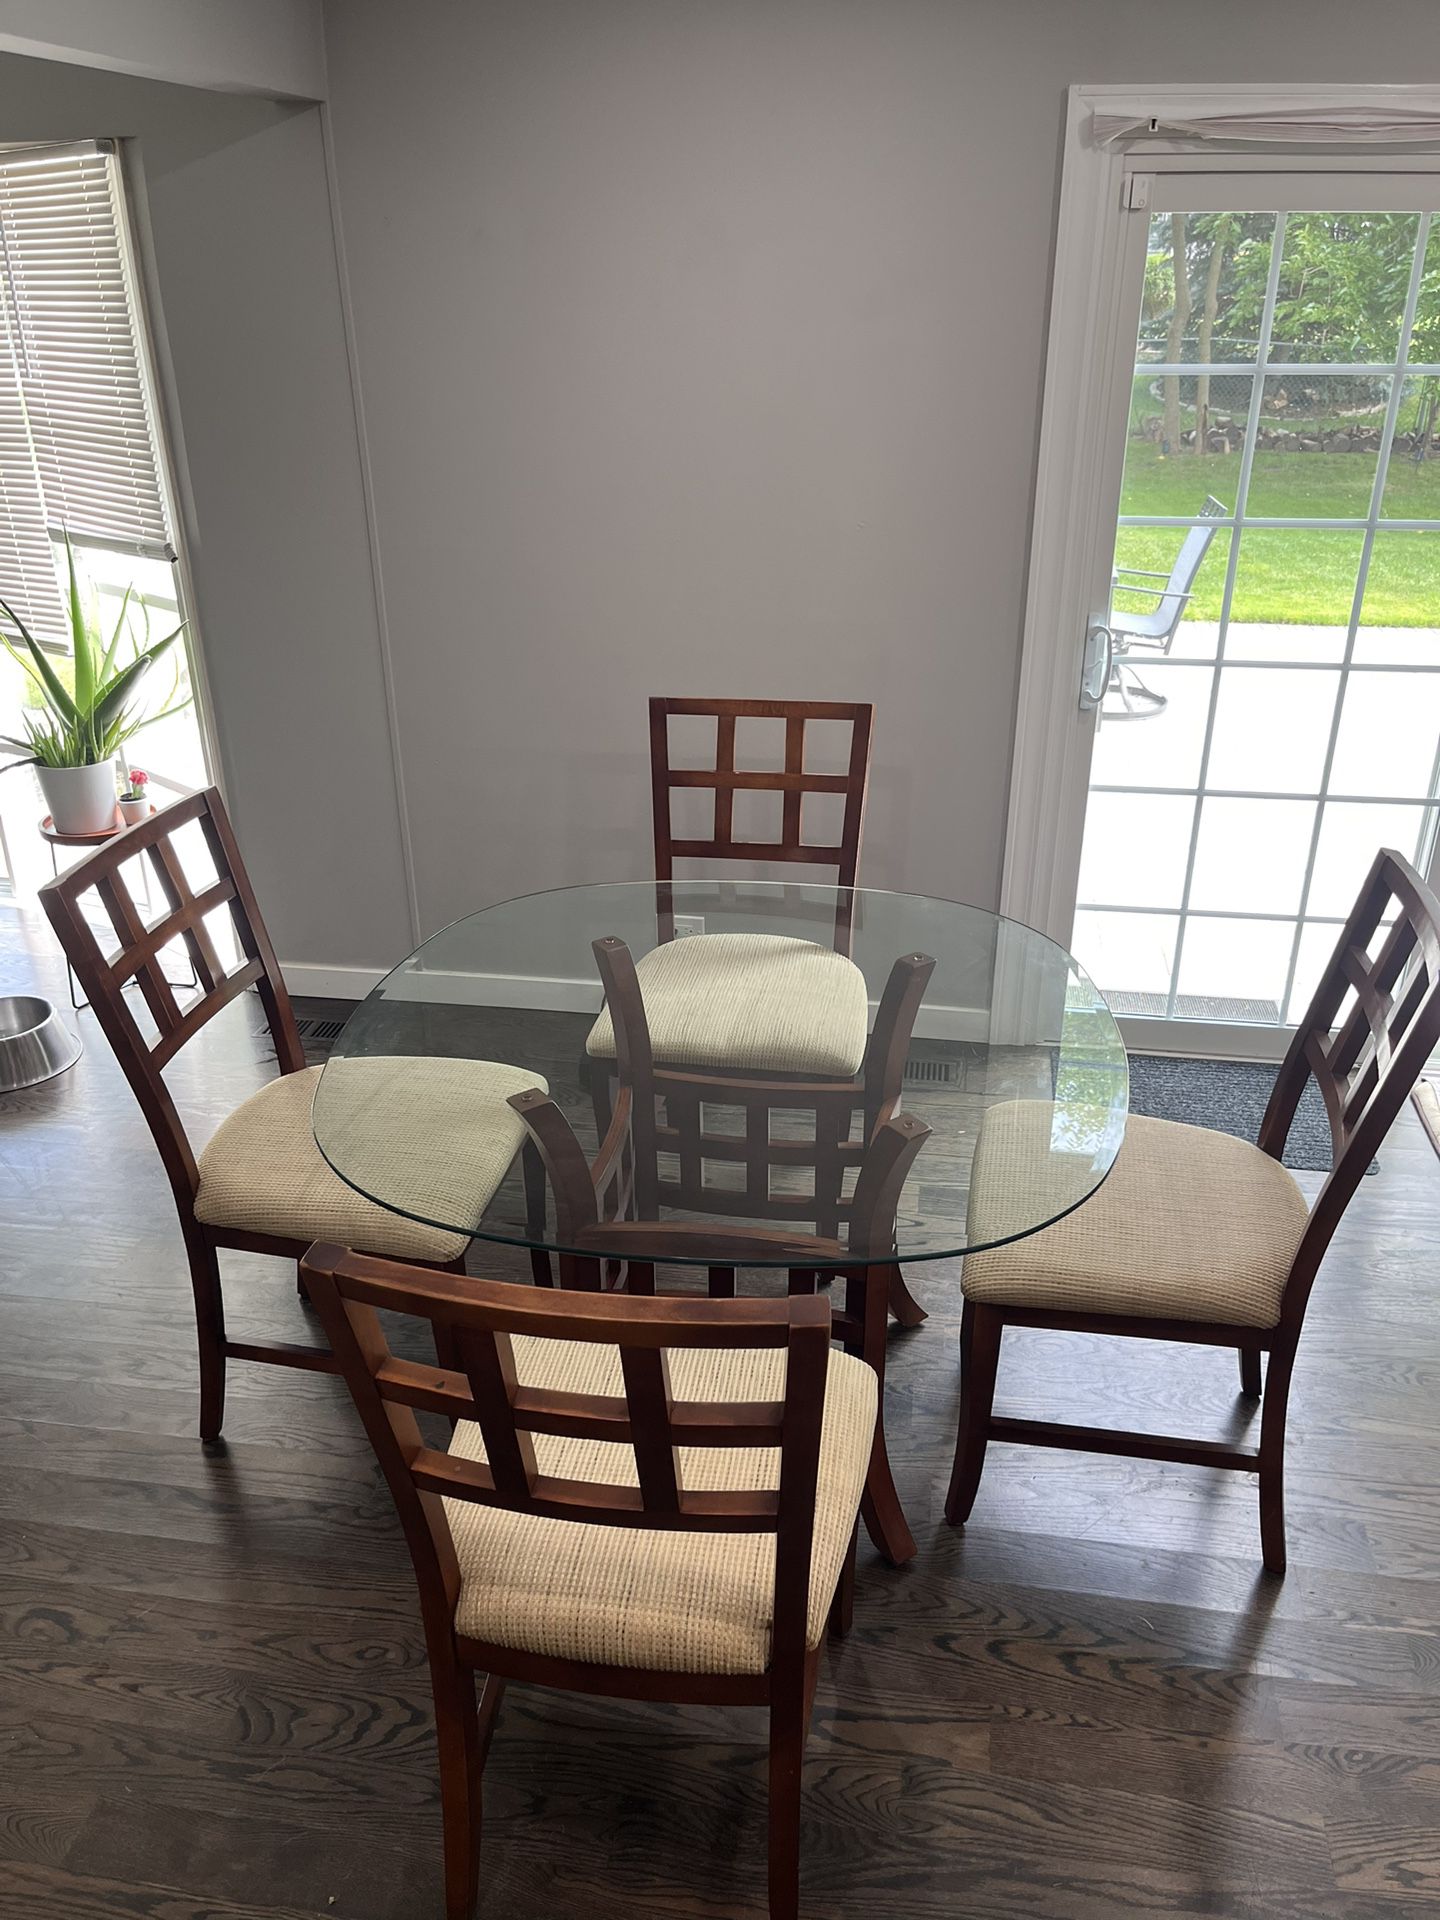 Dining Set For 4 People